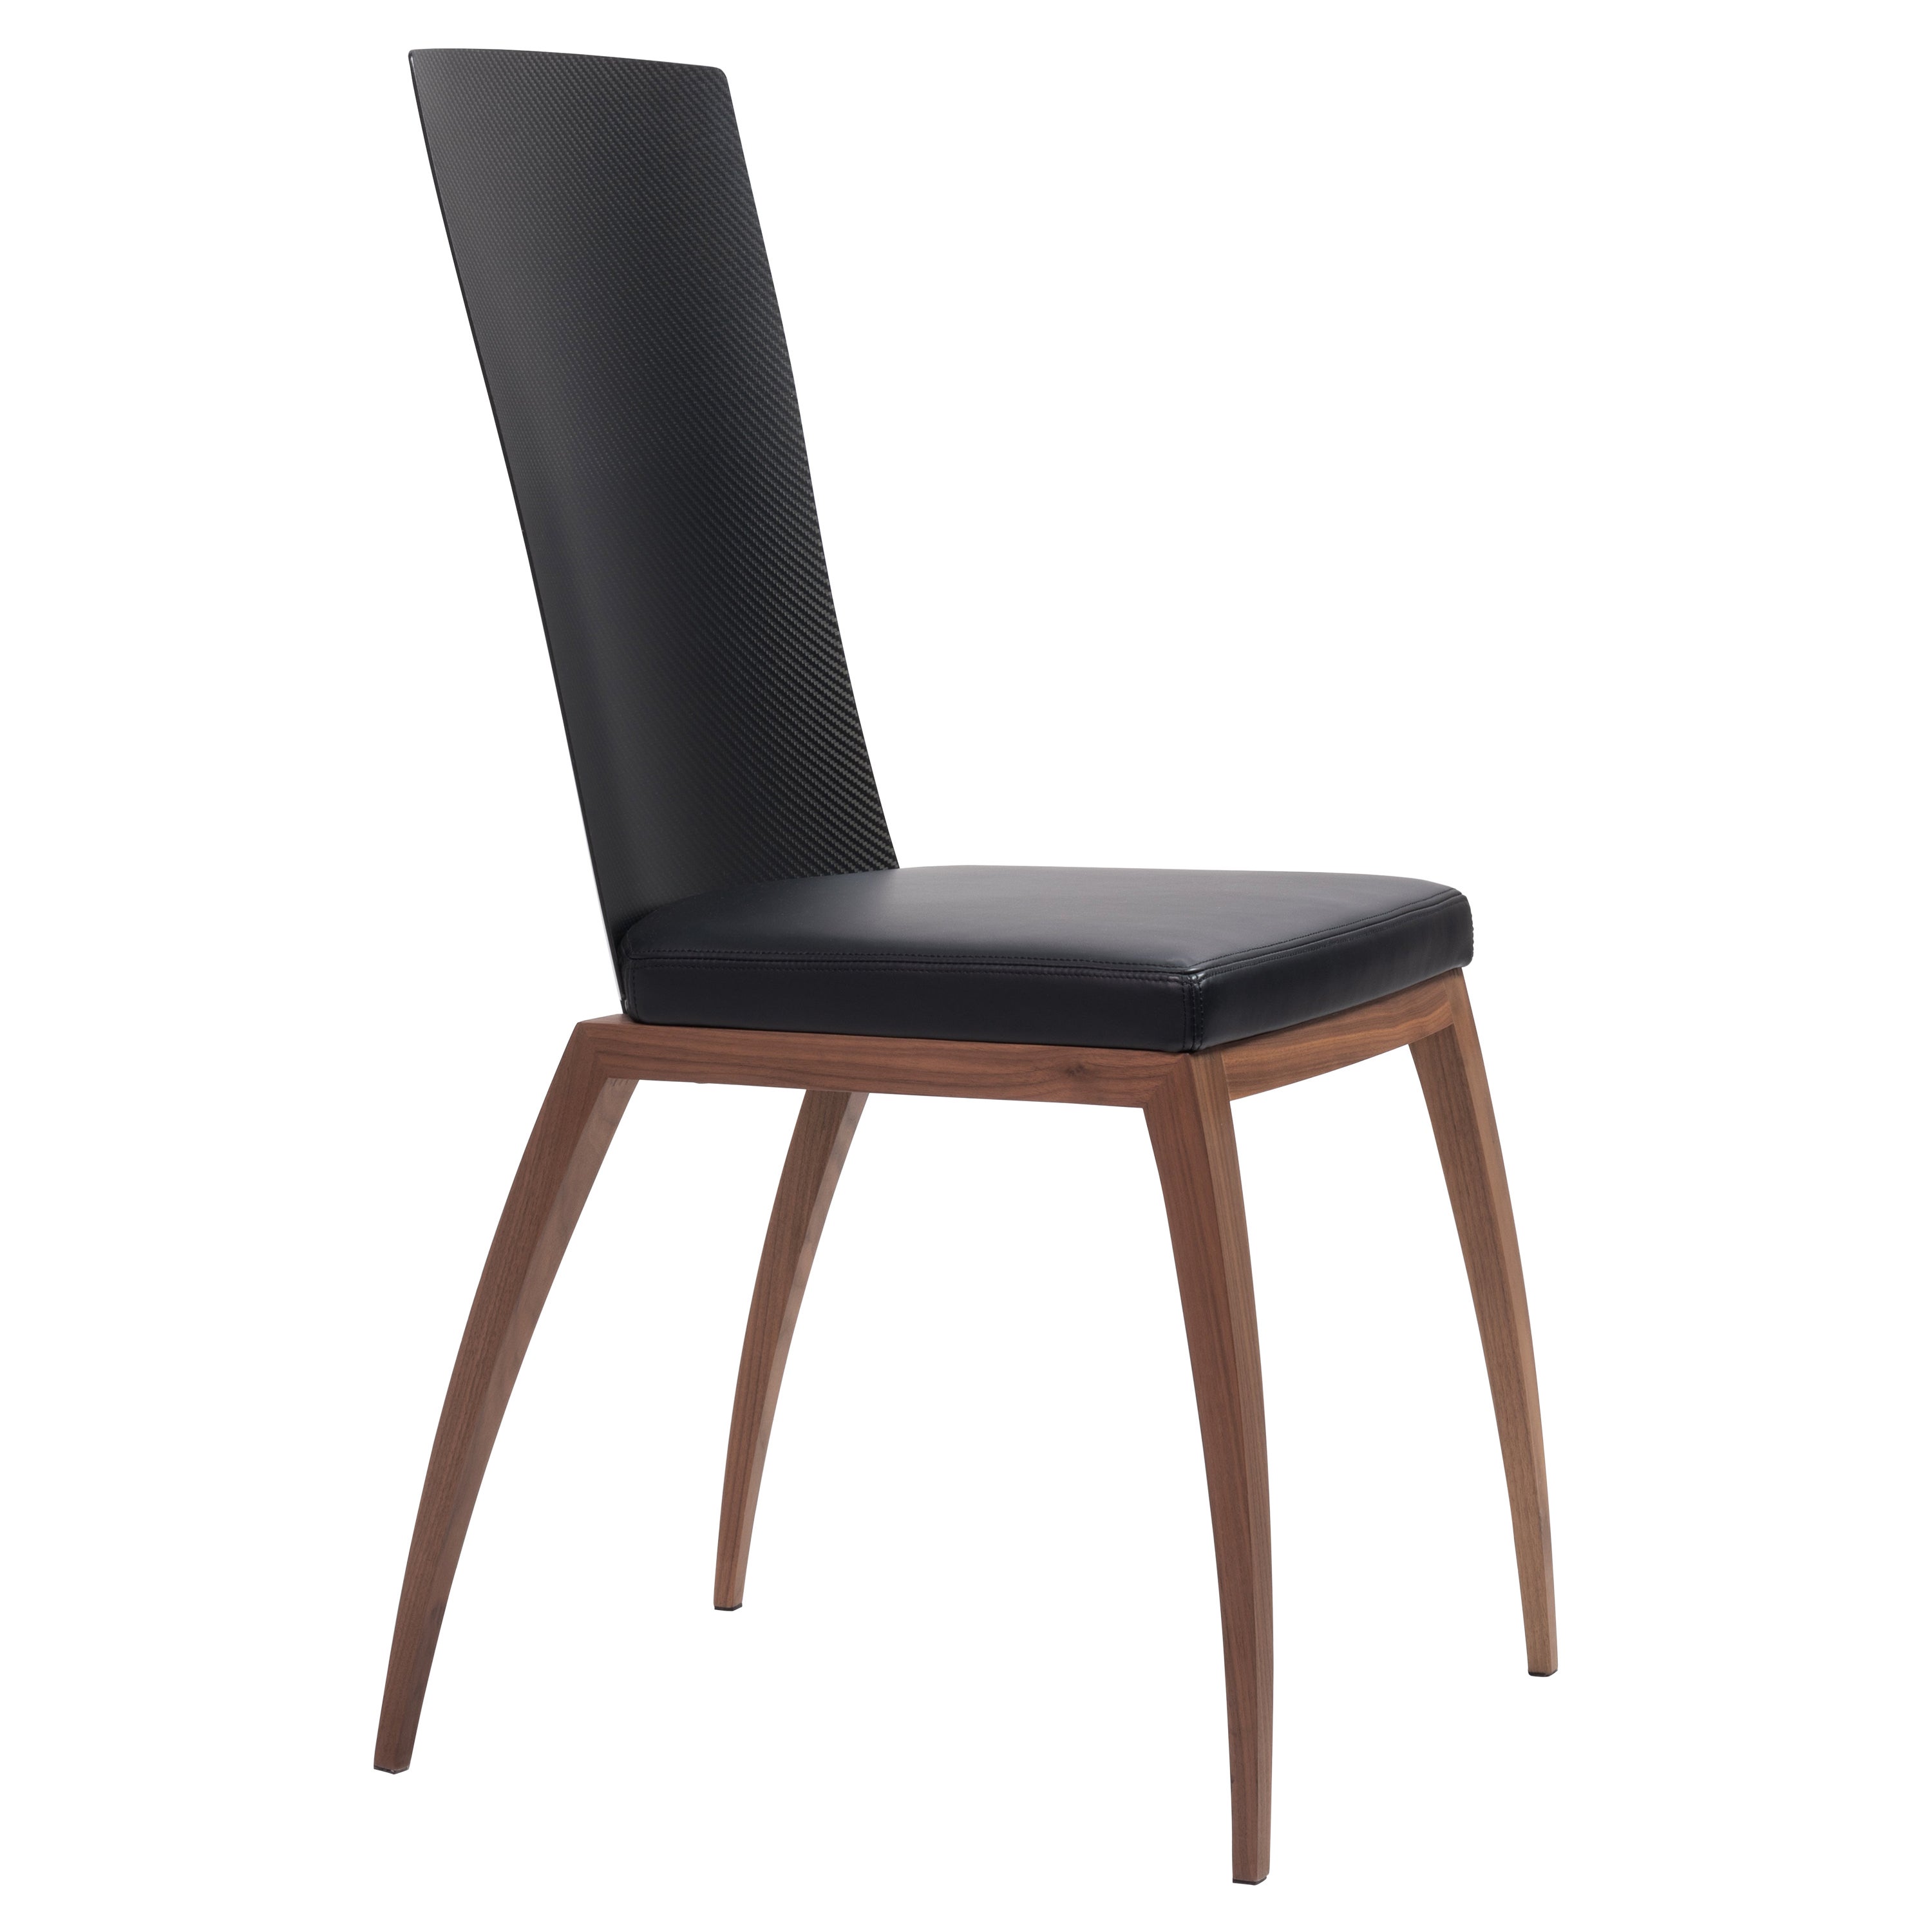 Fibra Chair, Design Chair in Carbon Fiber and Canaletto Walnut, Made in Italy